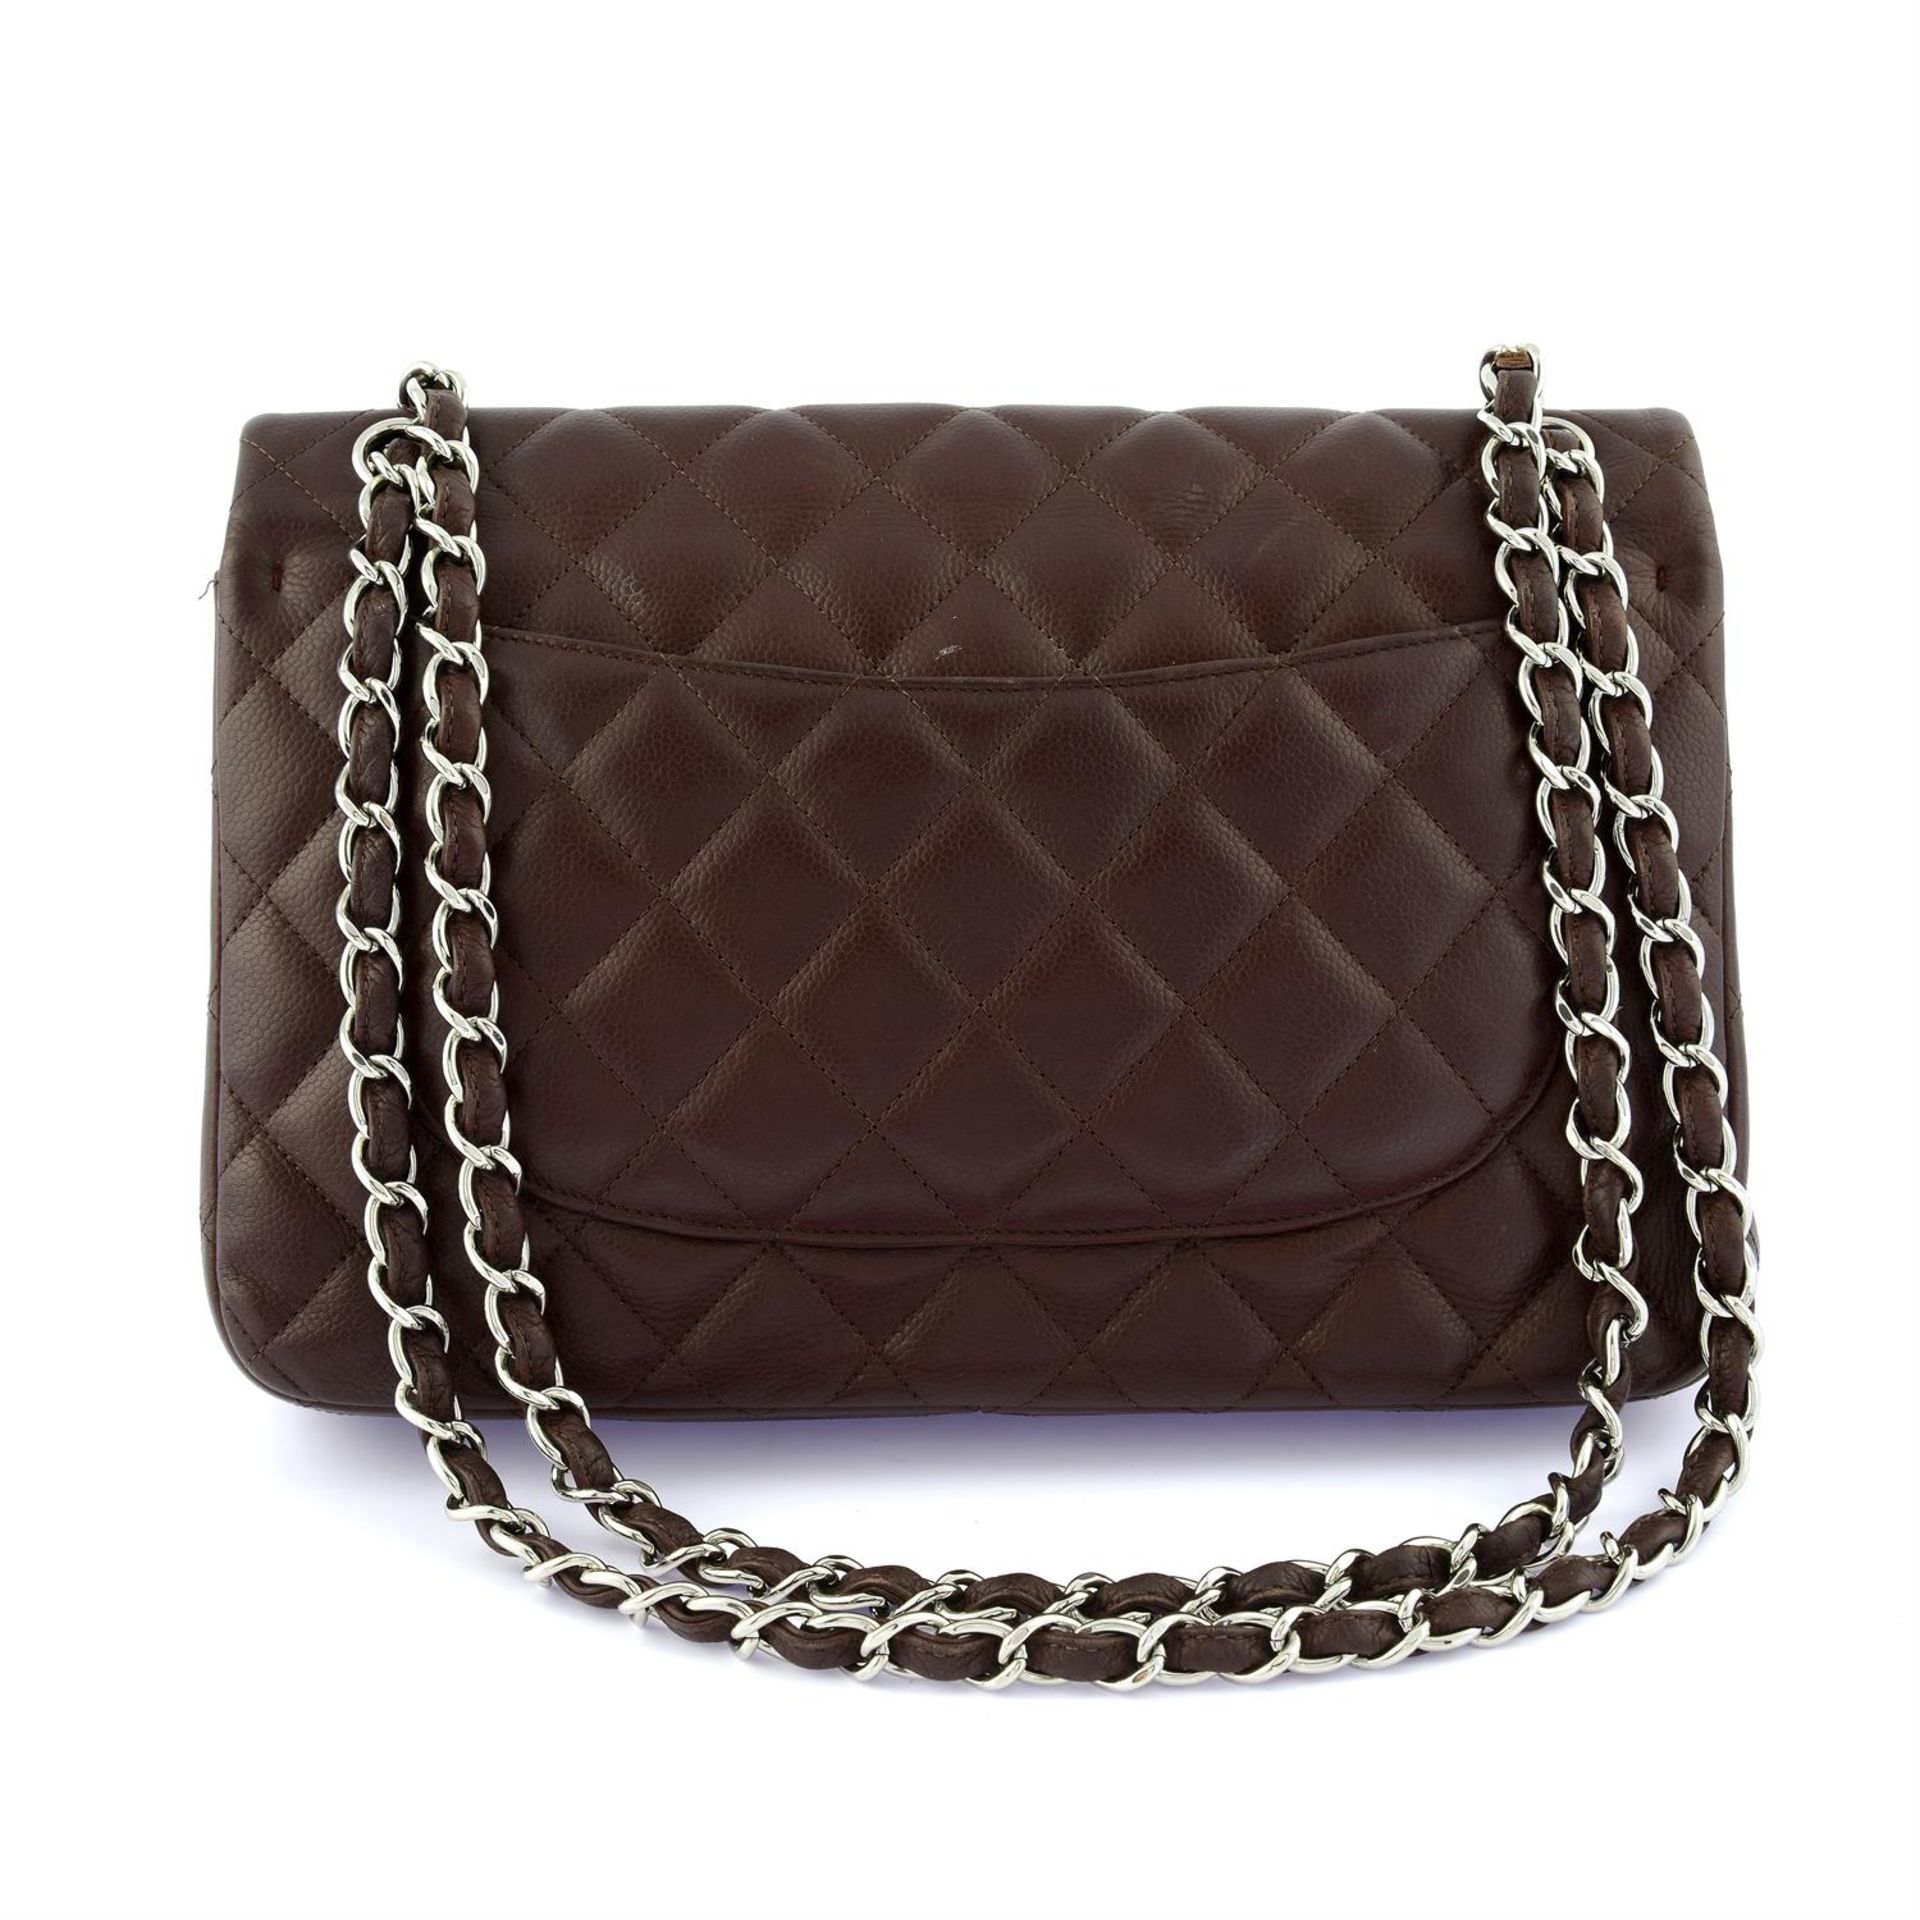 CHANEL - a burgundy lambskin leather double flap classic handbag. - Image 2 of 6